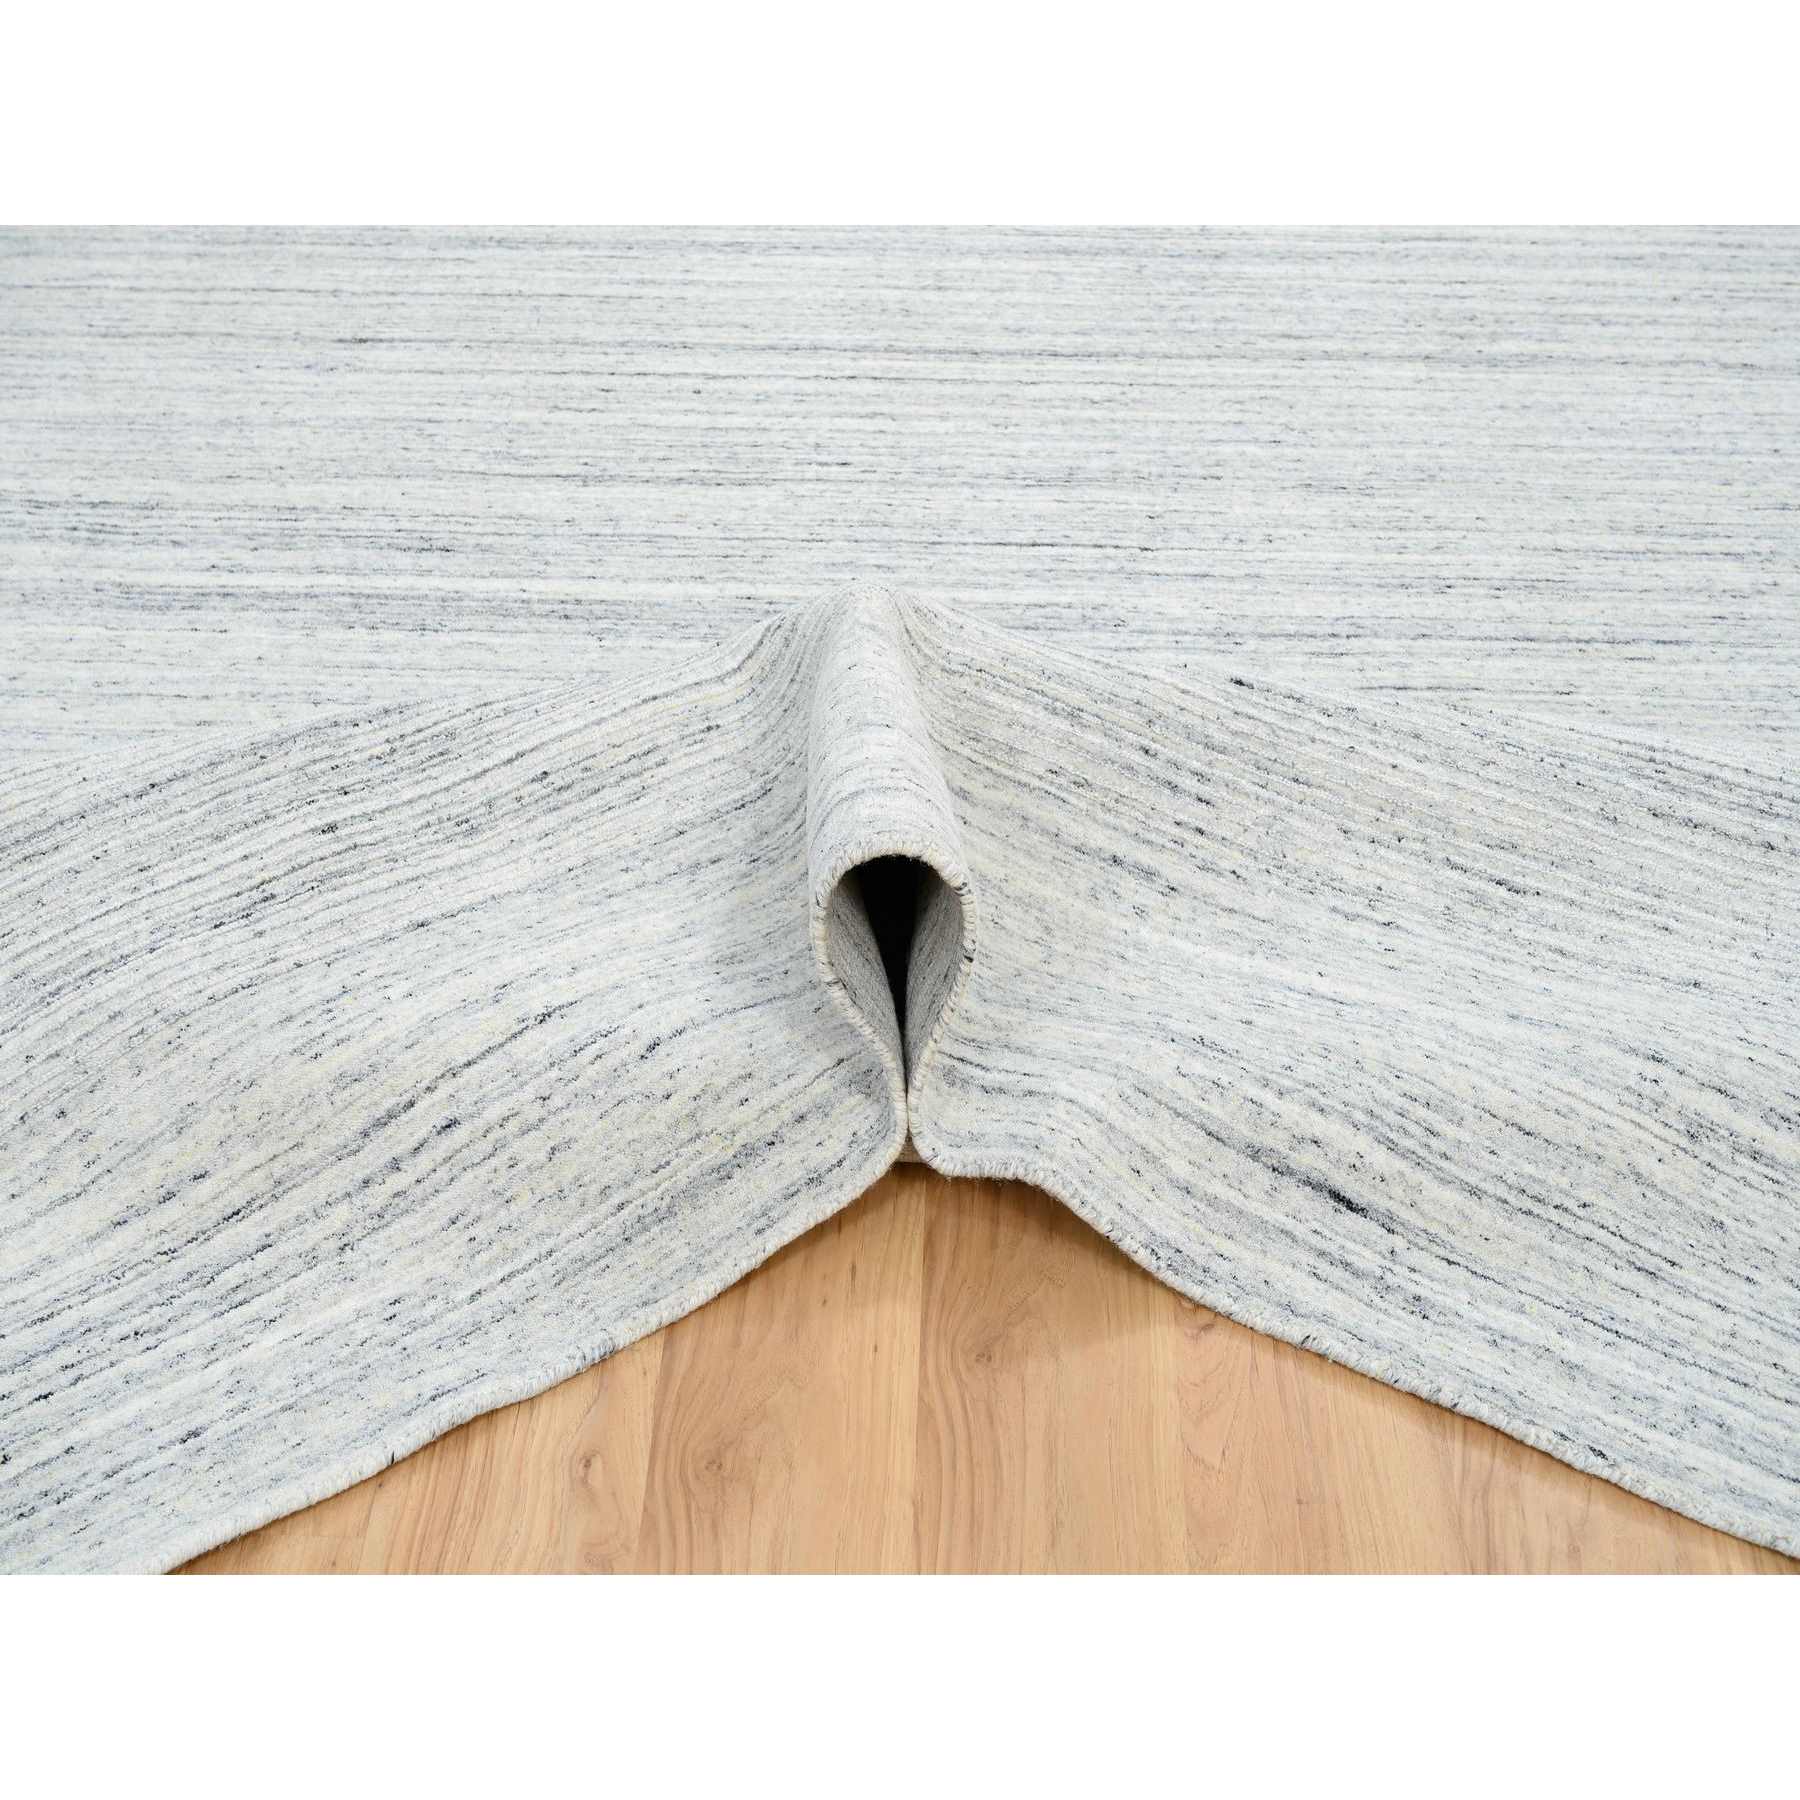 Modern-and-Contemporary-Hand-Loomed-Rug-323990